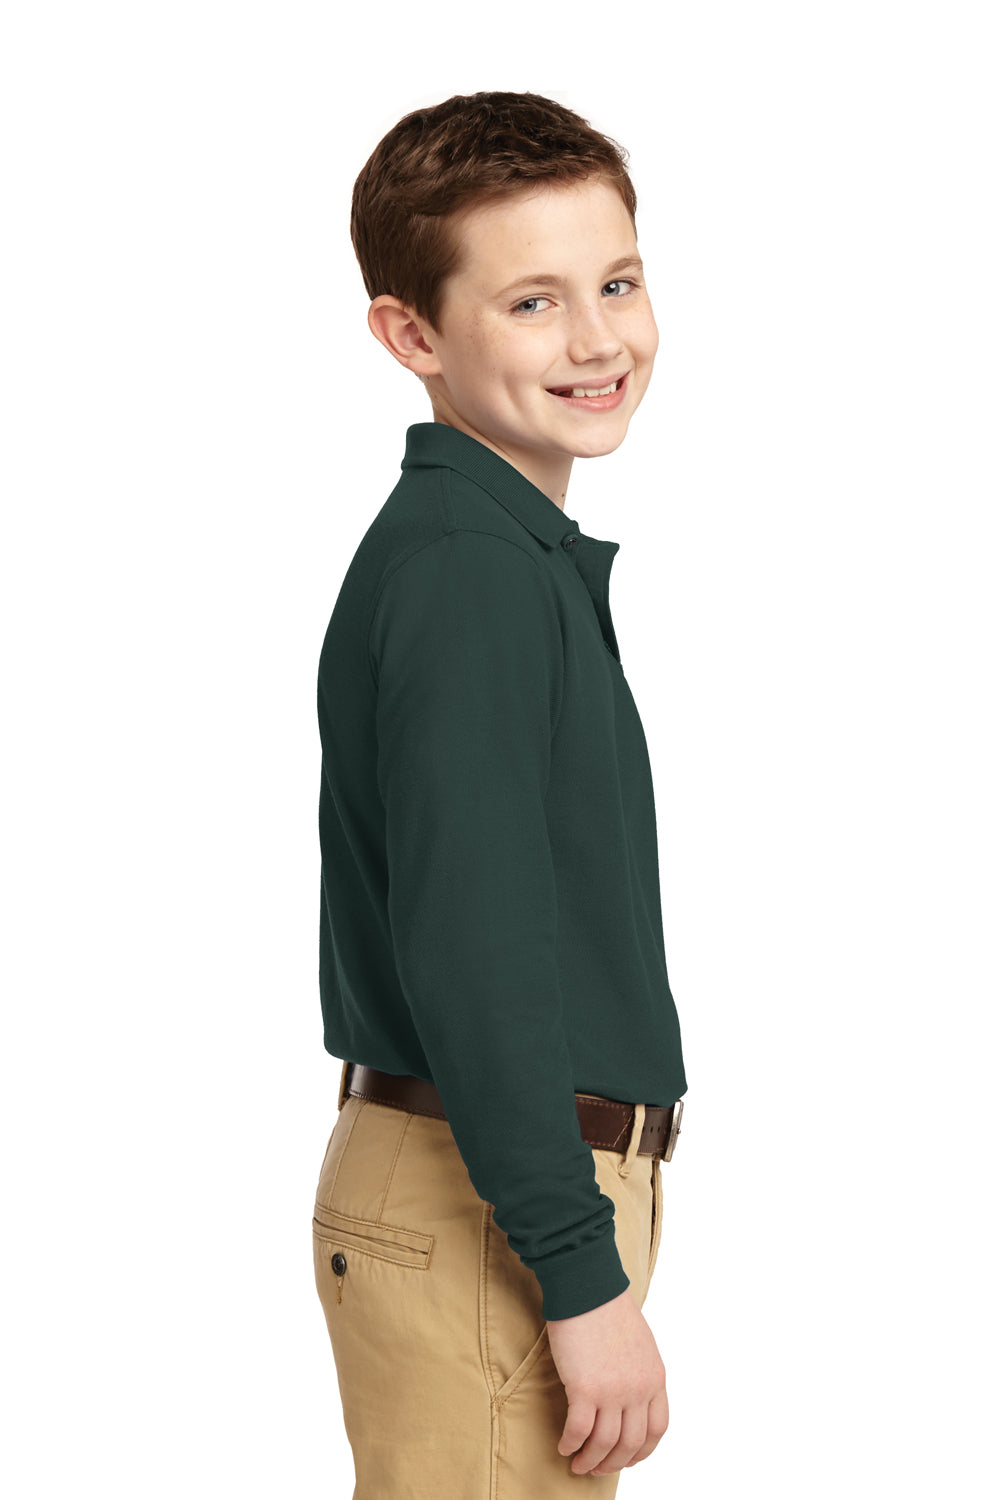 Port Authority Y500LS Youth Silk Touch Wrinkle Resistant Long Sleeve Polo Shirt Dark Green Side